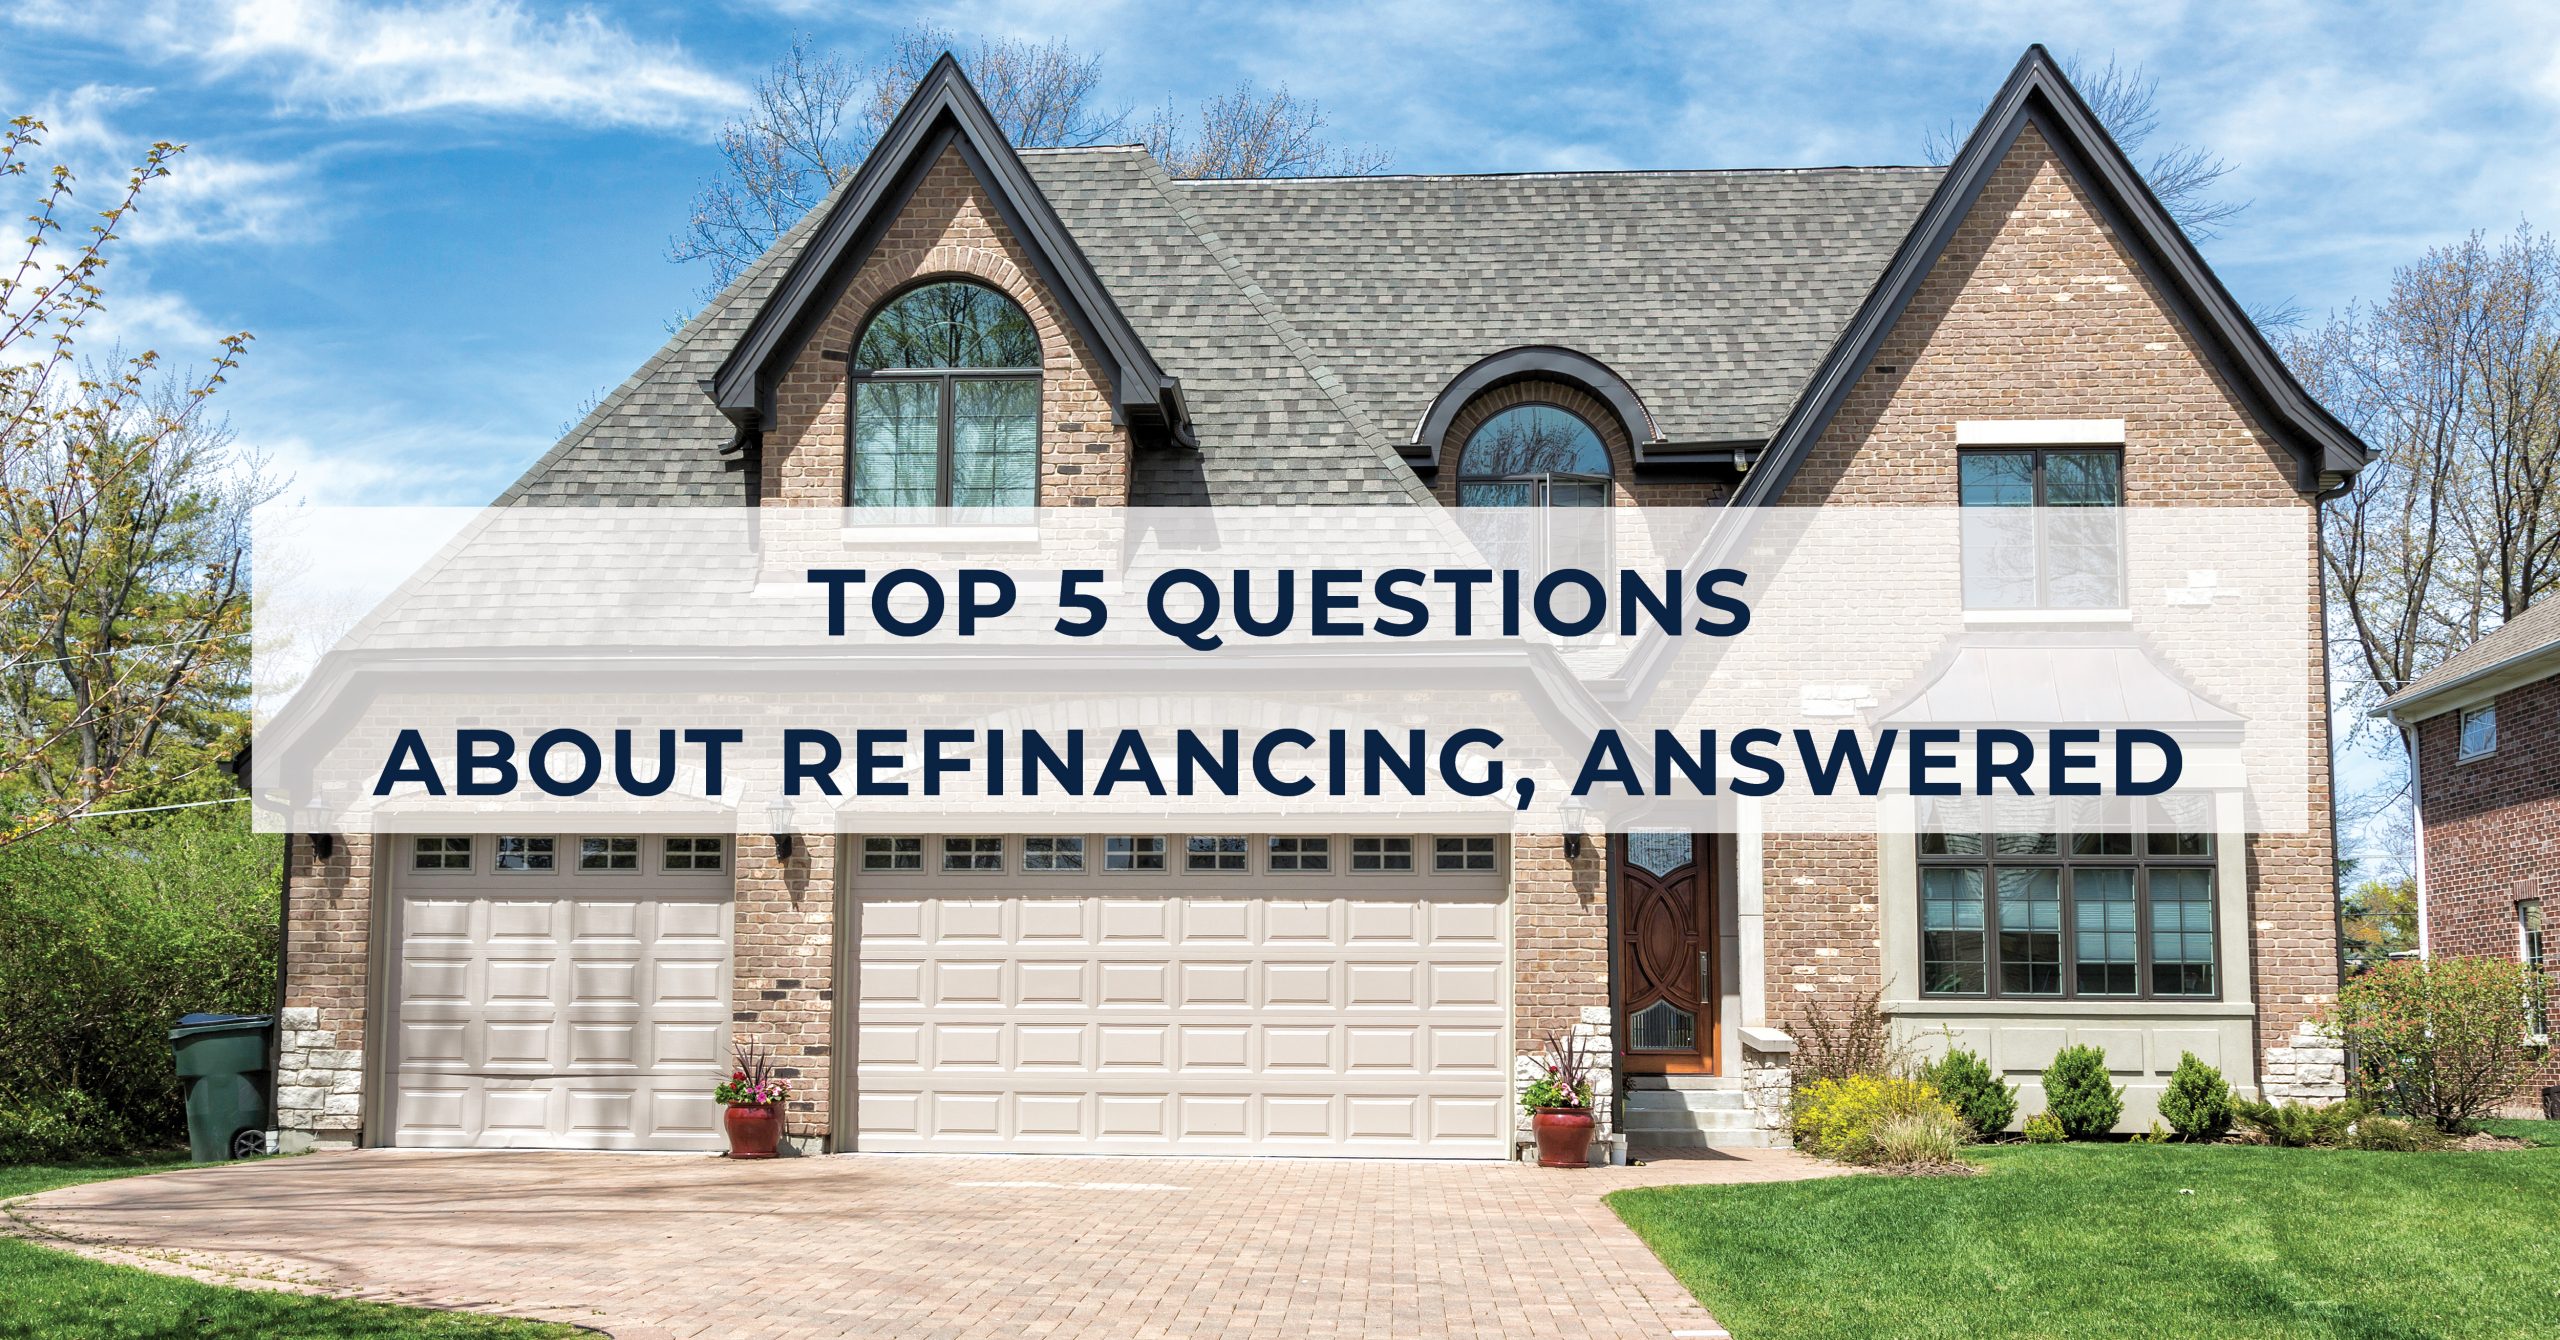 Top 5 Questions About Refinancing, Answered 